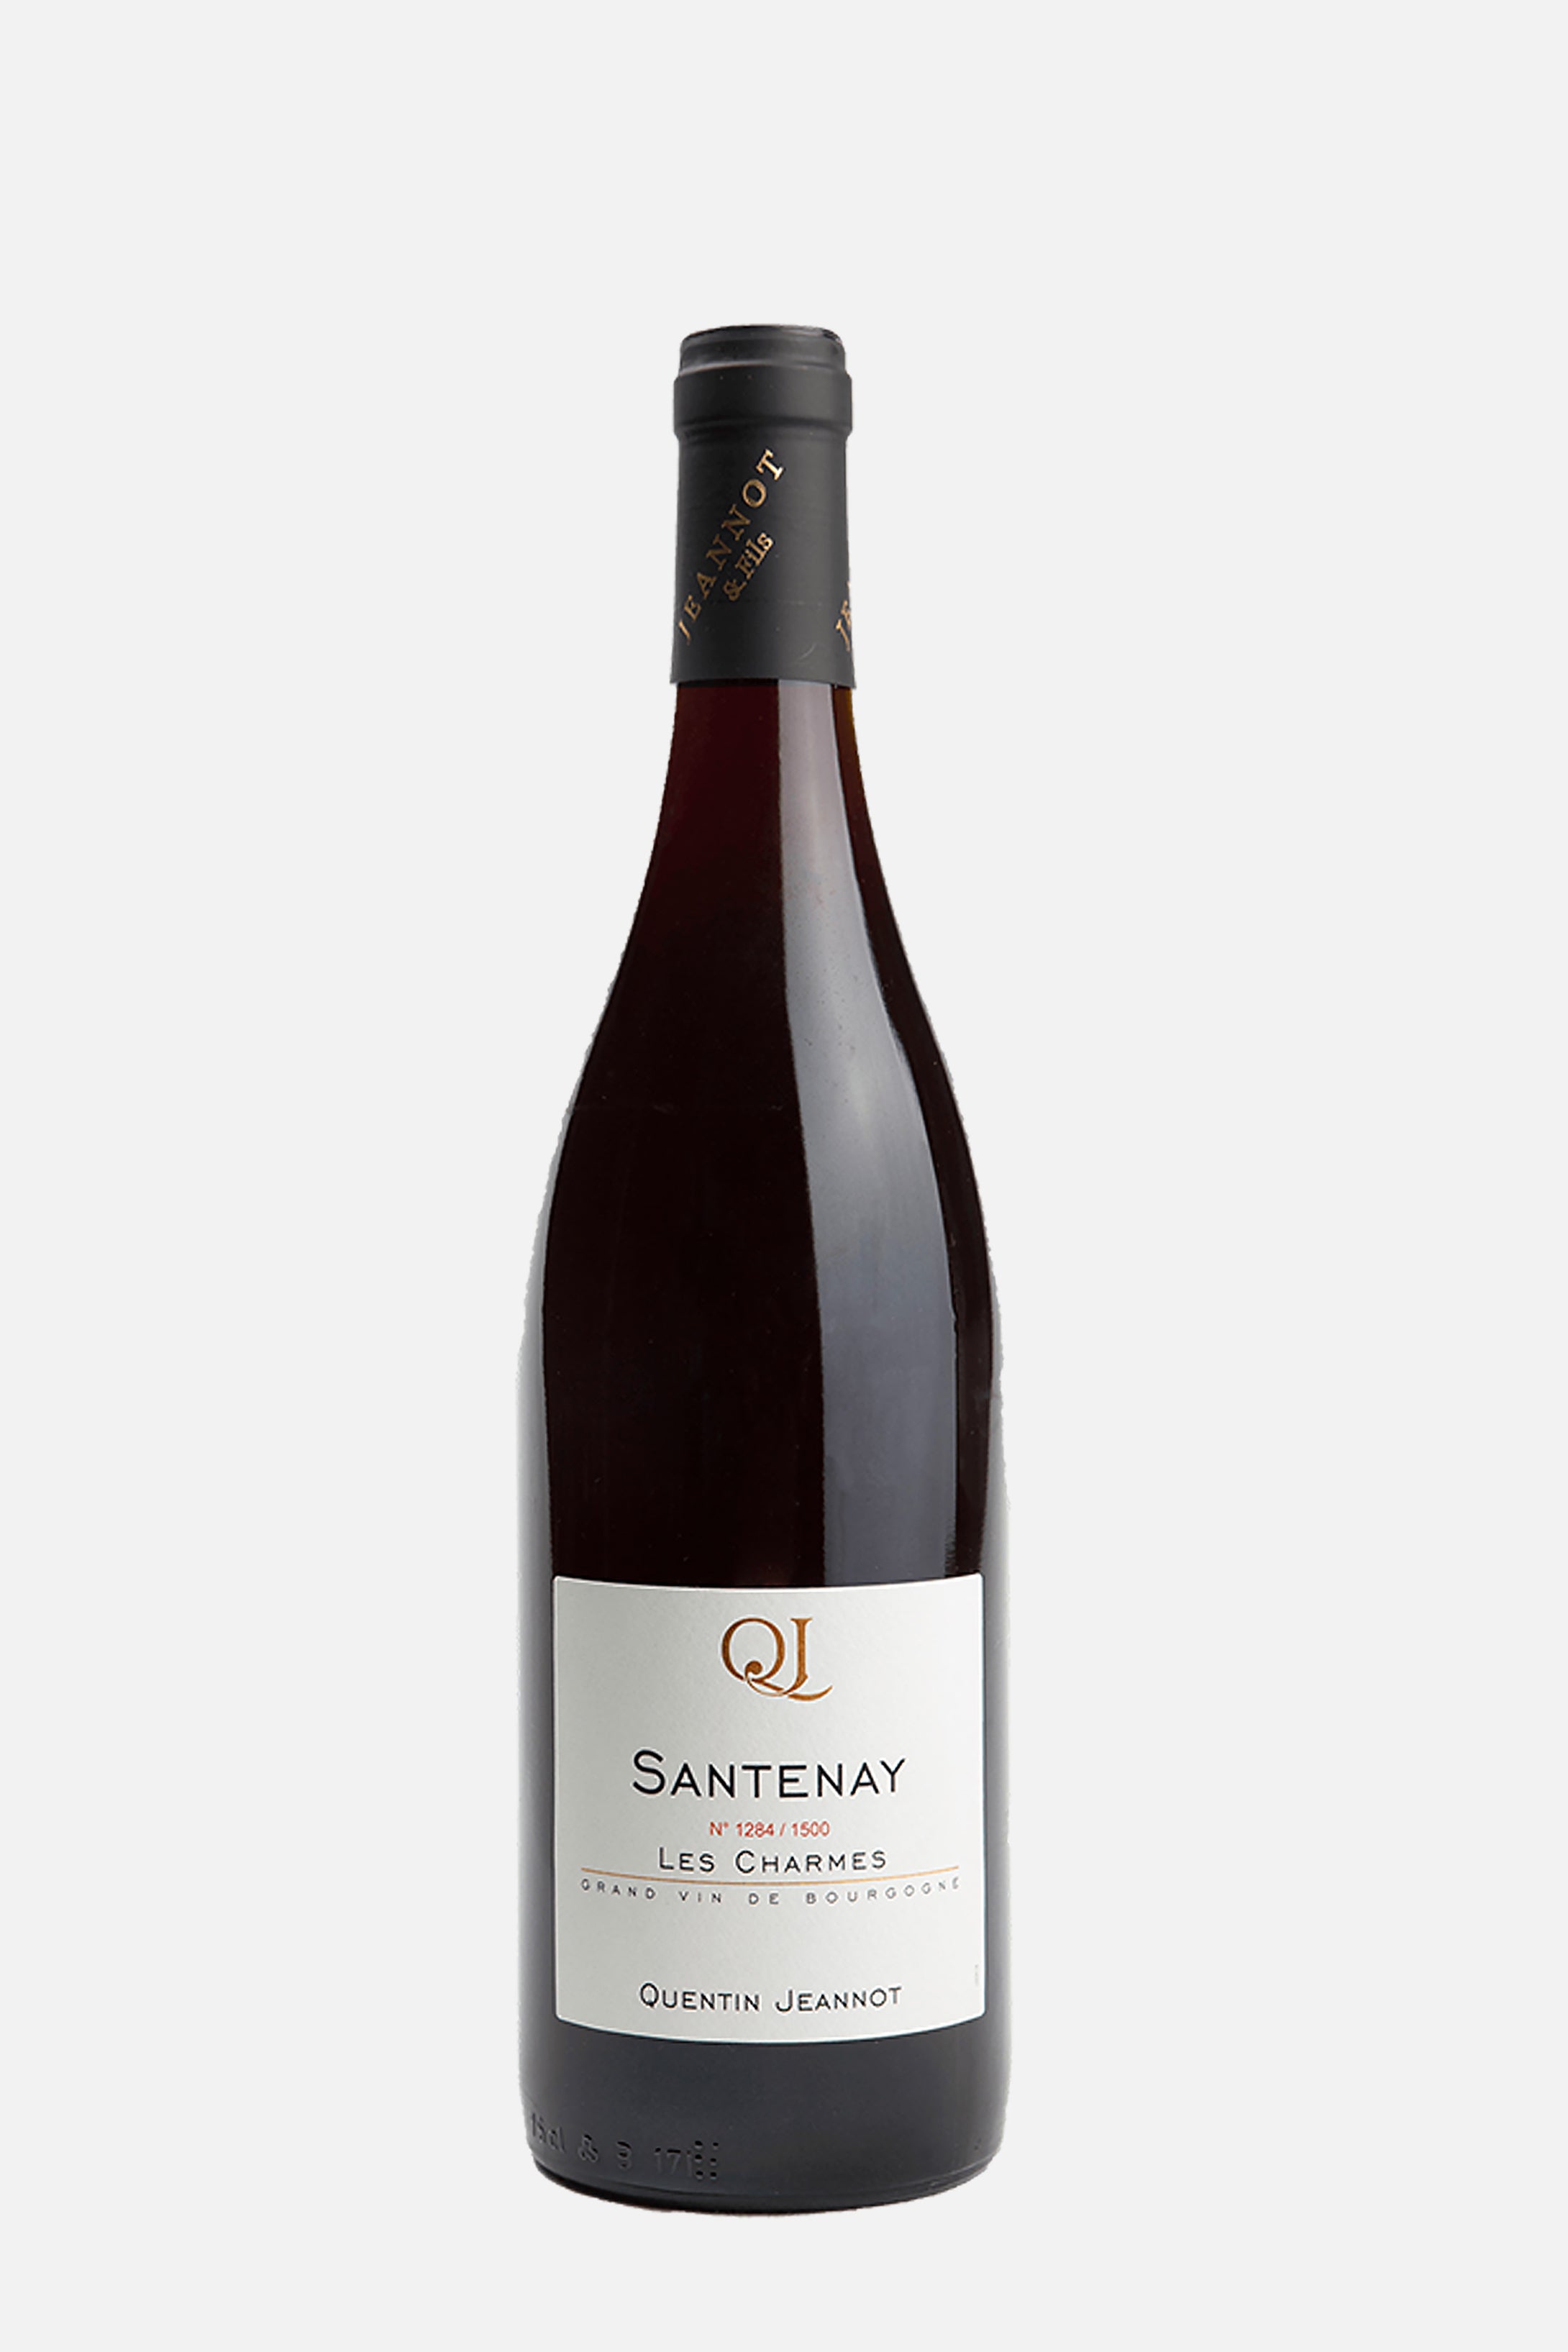 Santenay Les Charmes 2020 Rood, Domaine Quentin Jeannot